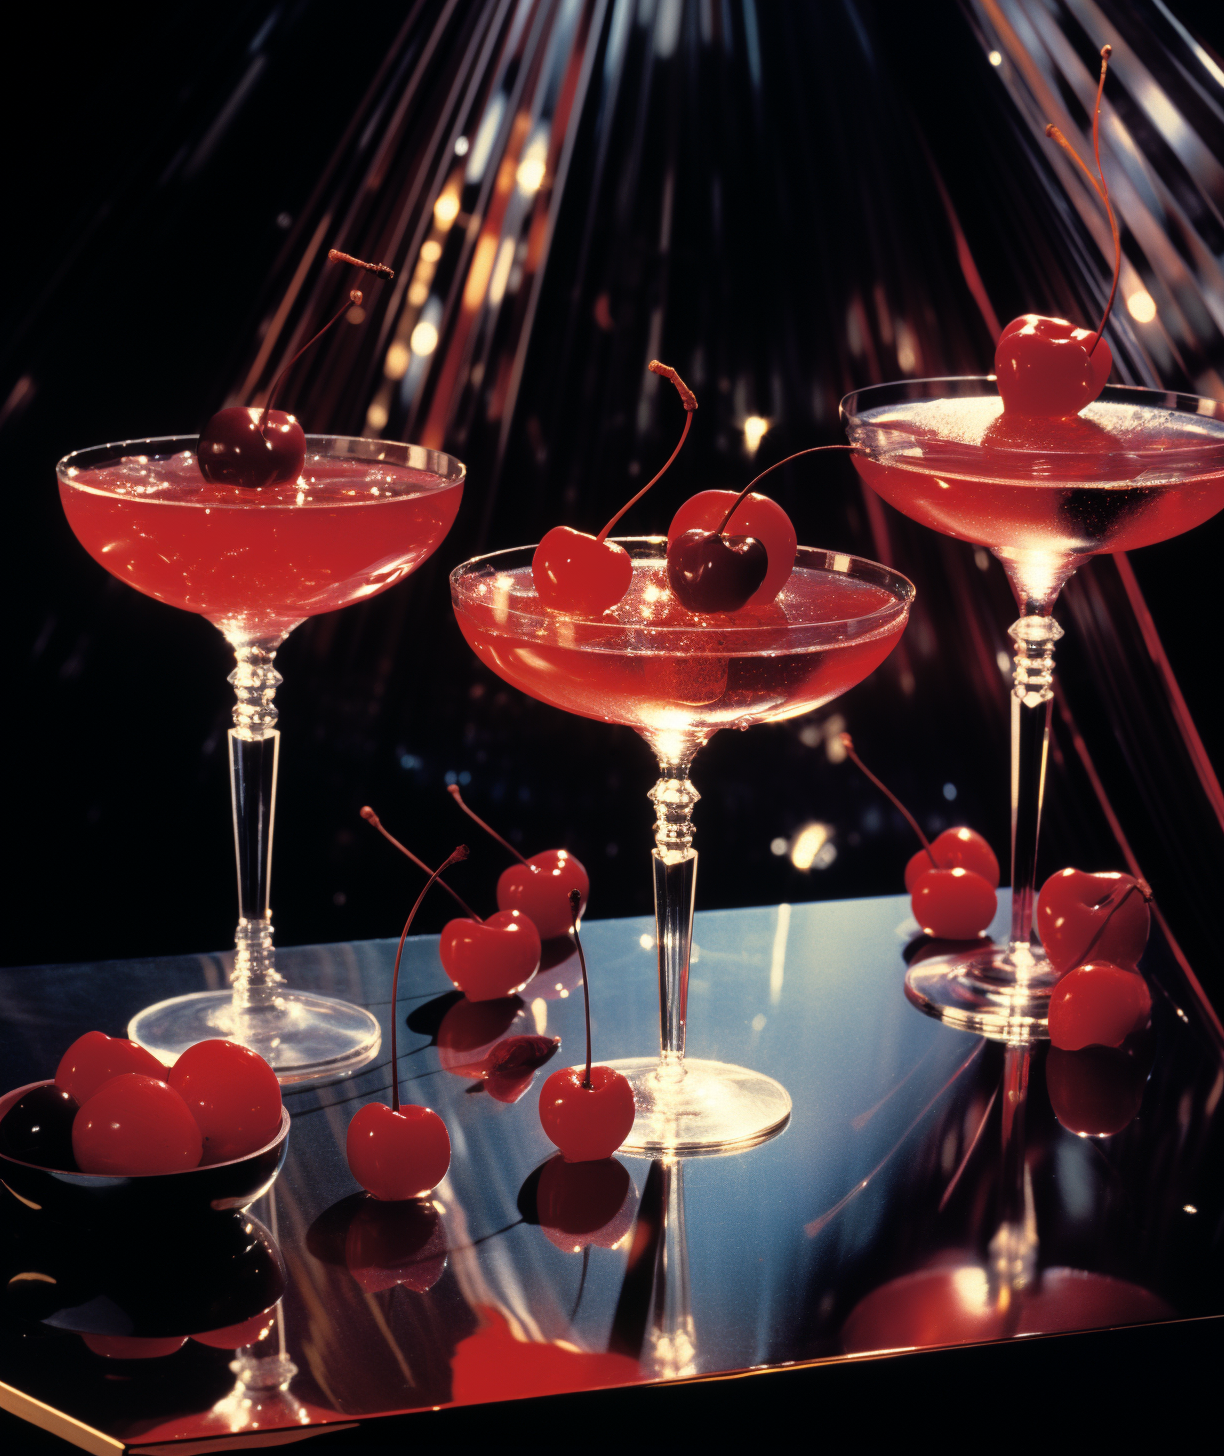 knownpoisons_a_photo_of_cocktails_being_served_with_cherries_in_4aefbb63-d67a-42f9-b8ba-3dfdbbc93005.png